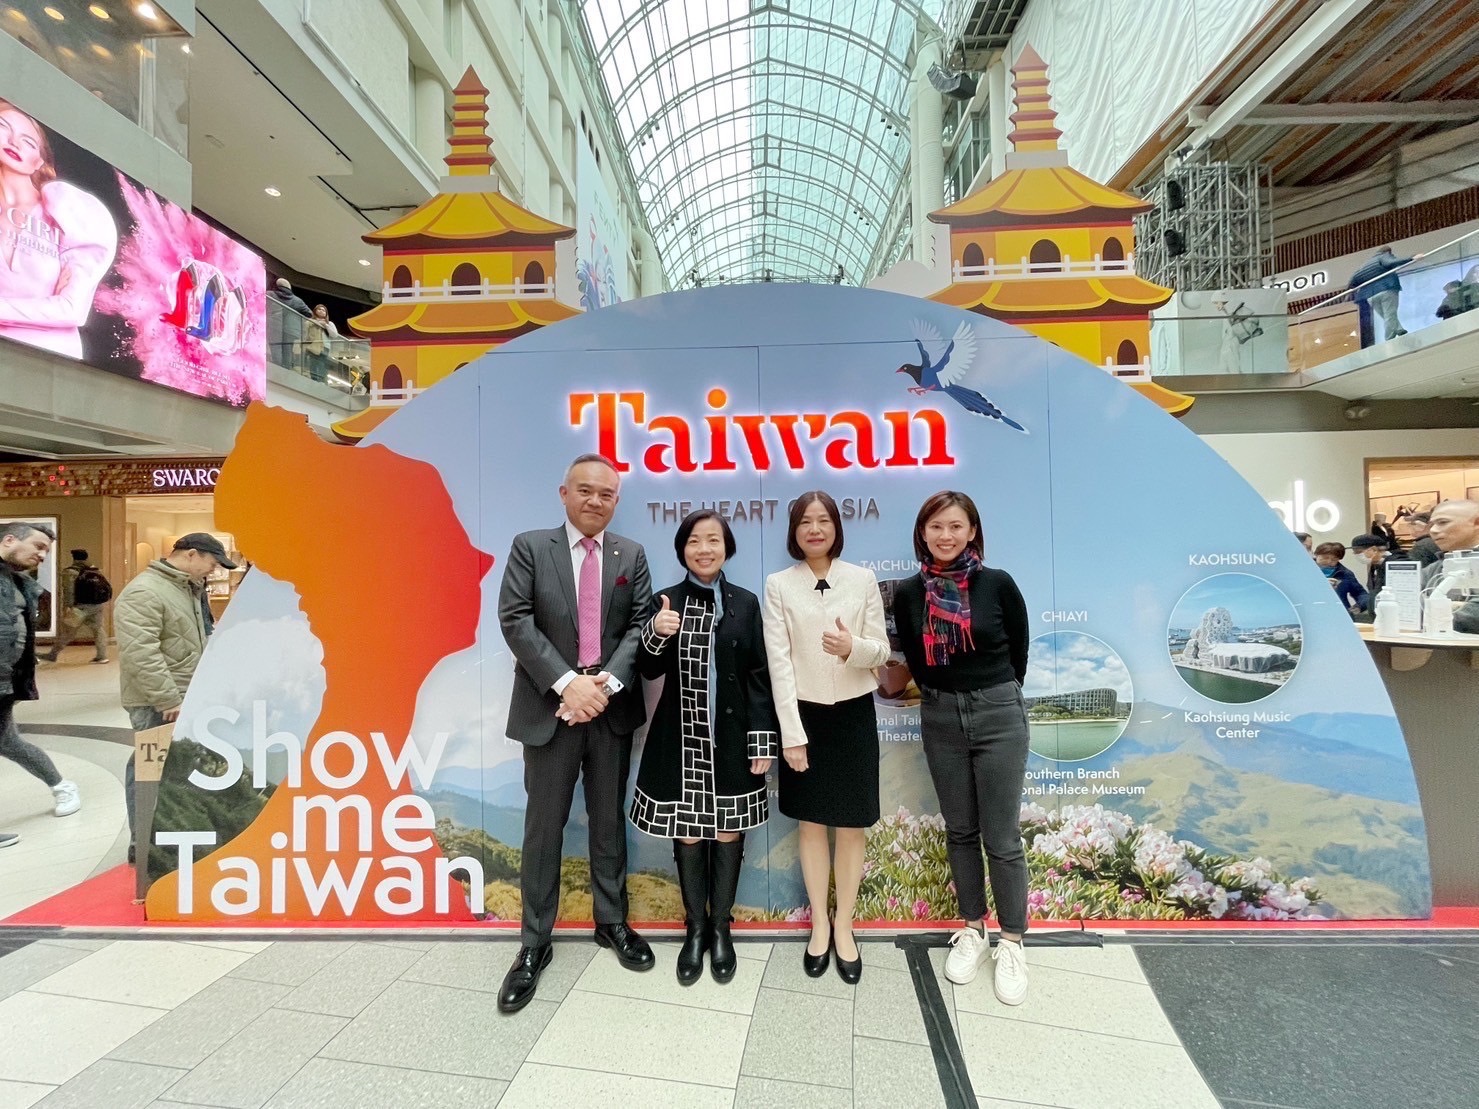 From left to right: 1) Randall Chiang, General Manager, Eva Airways Corp. America, Toronto Branch 2) Jin-Ling Chen, Director General, TECO, Toronto 3) Claire Wen, Director, TTA, NY, 4) Gail Chang, Marketing Manager, TTA, SF Office